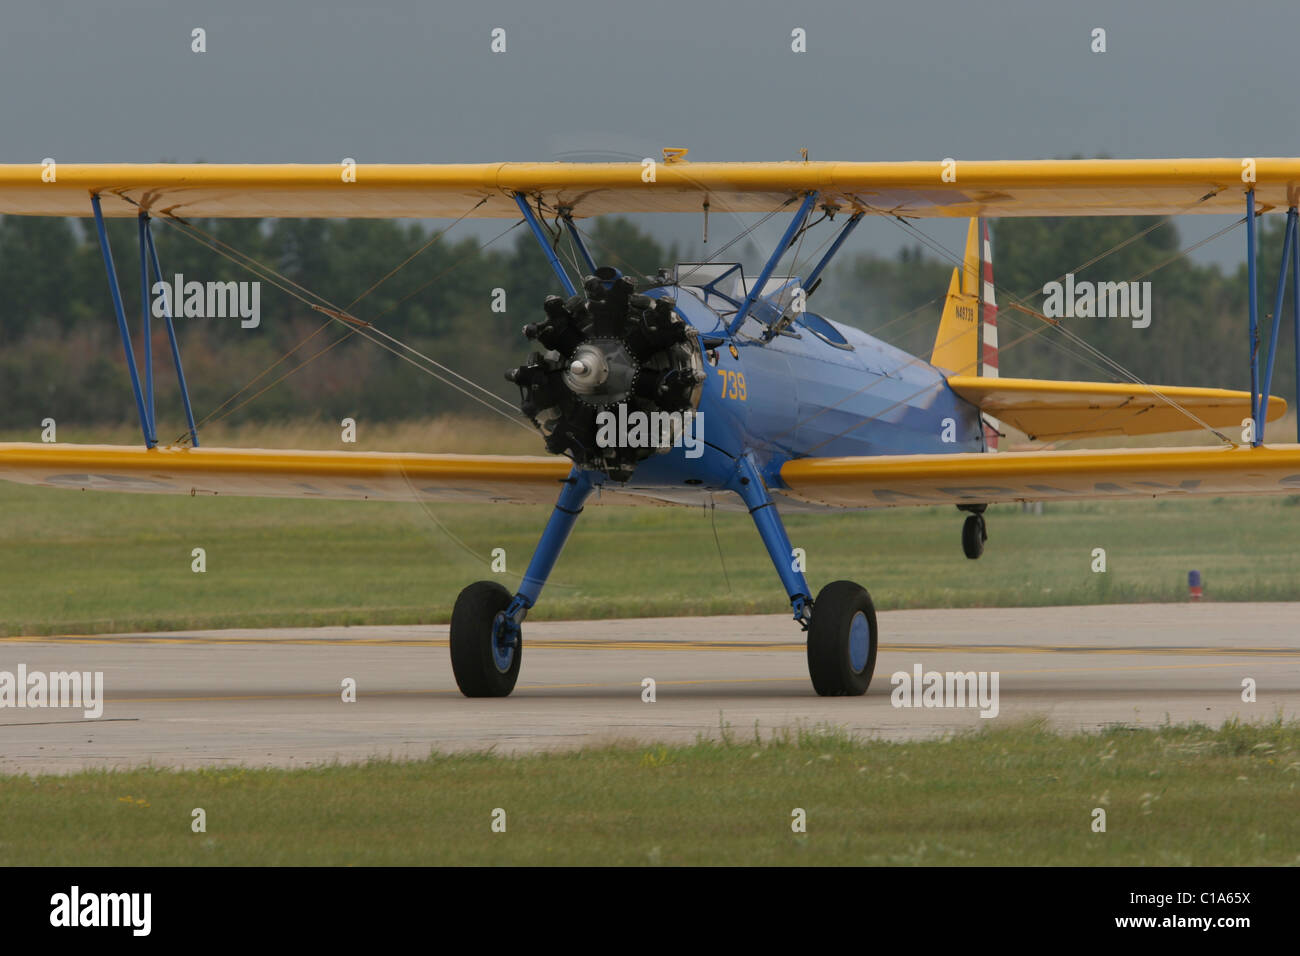 Boeing-Stearman Model 75 Kaydet, PT-13, WWII biplane primary trainer aircraft on takeoff roll, tail raised. Stock Photo